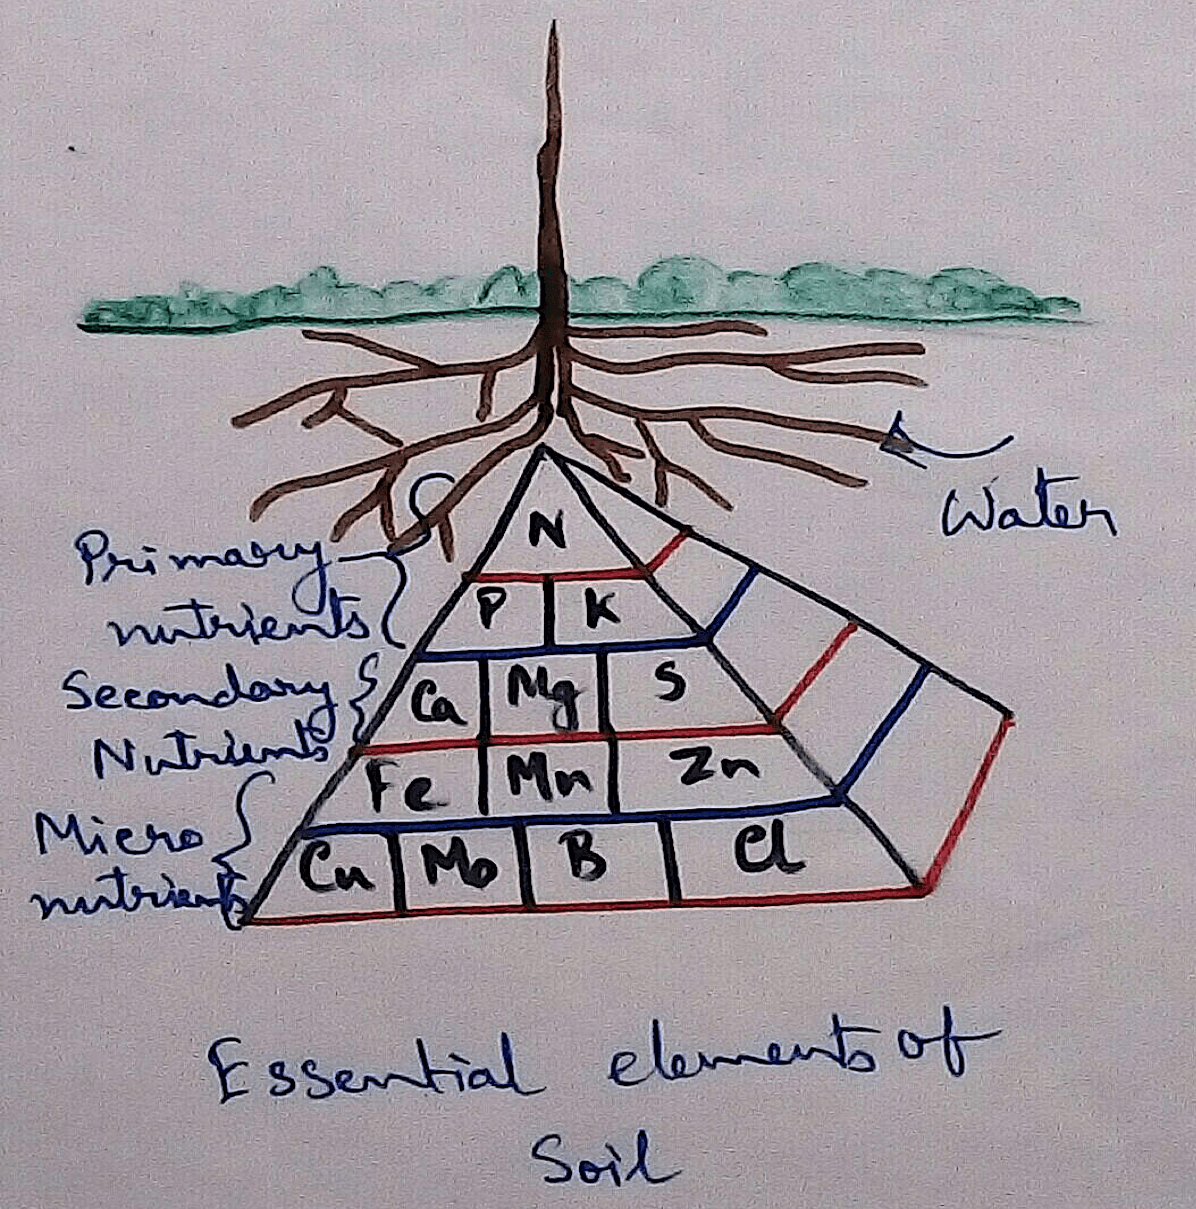 Essential Elements of Soil